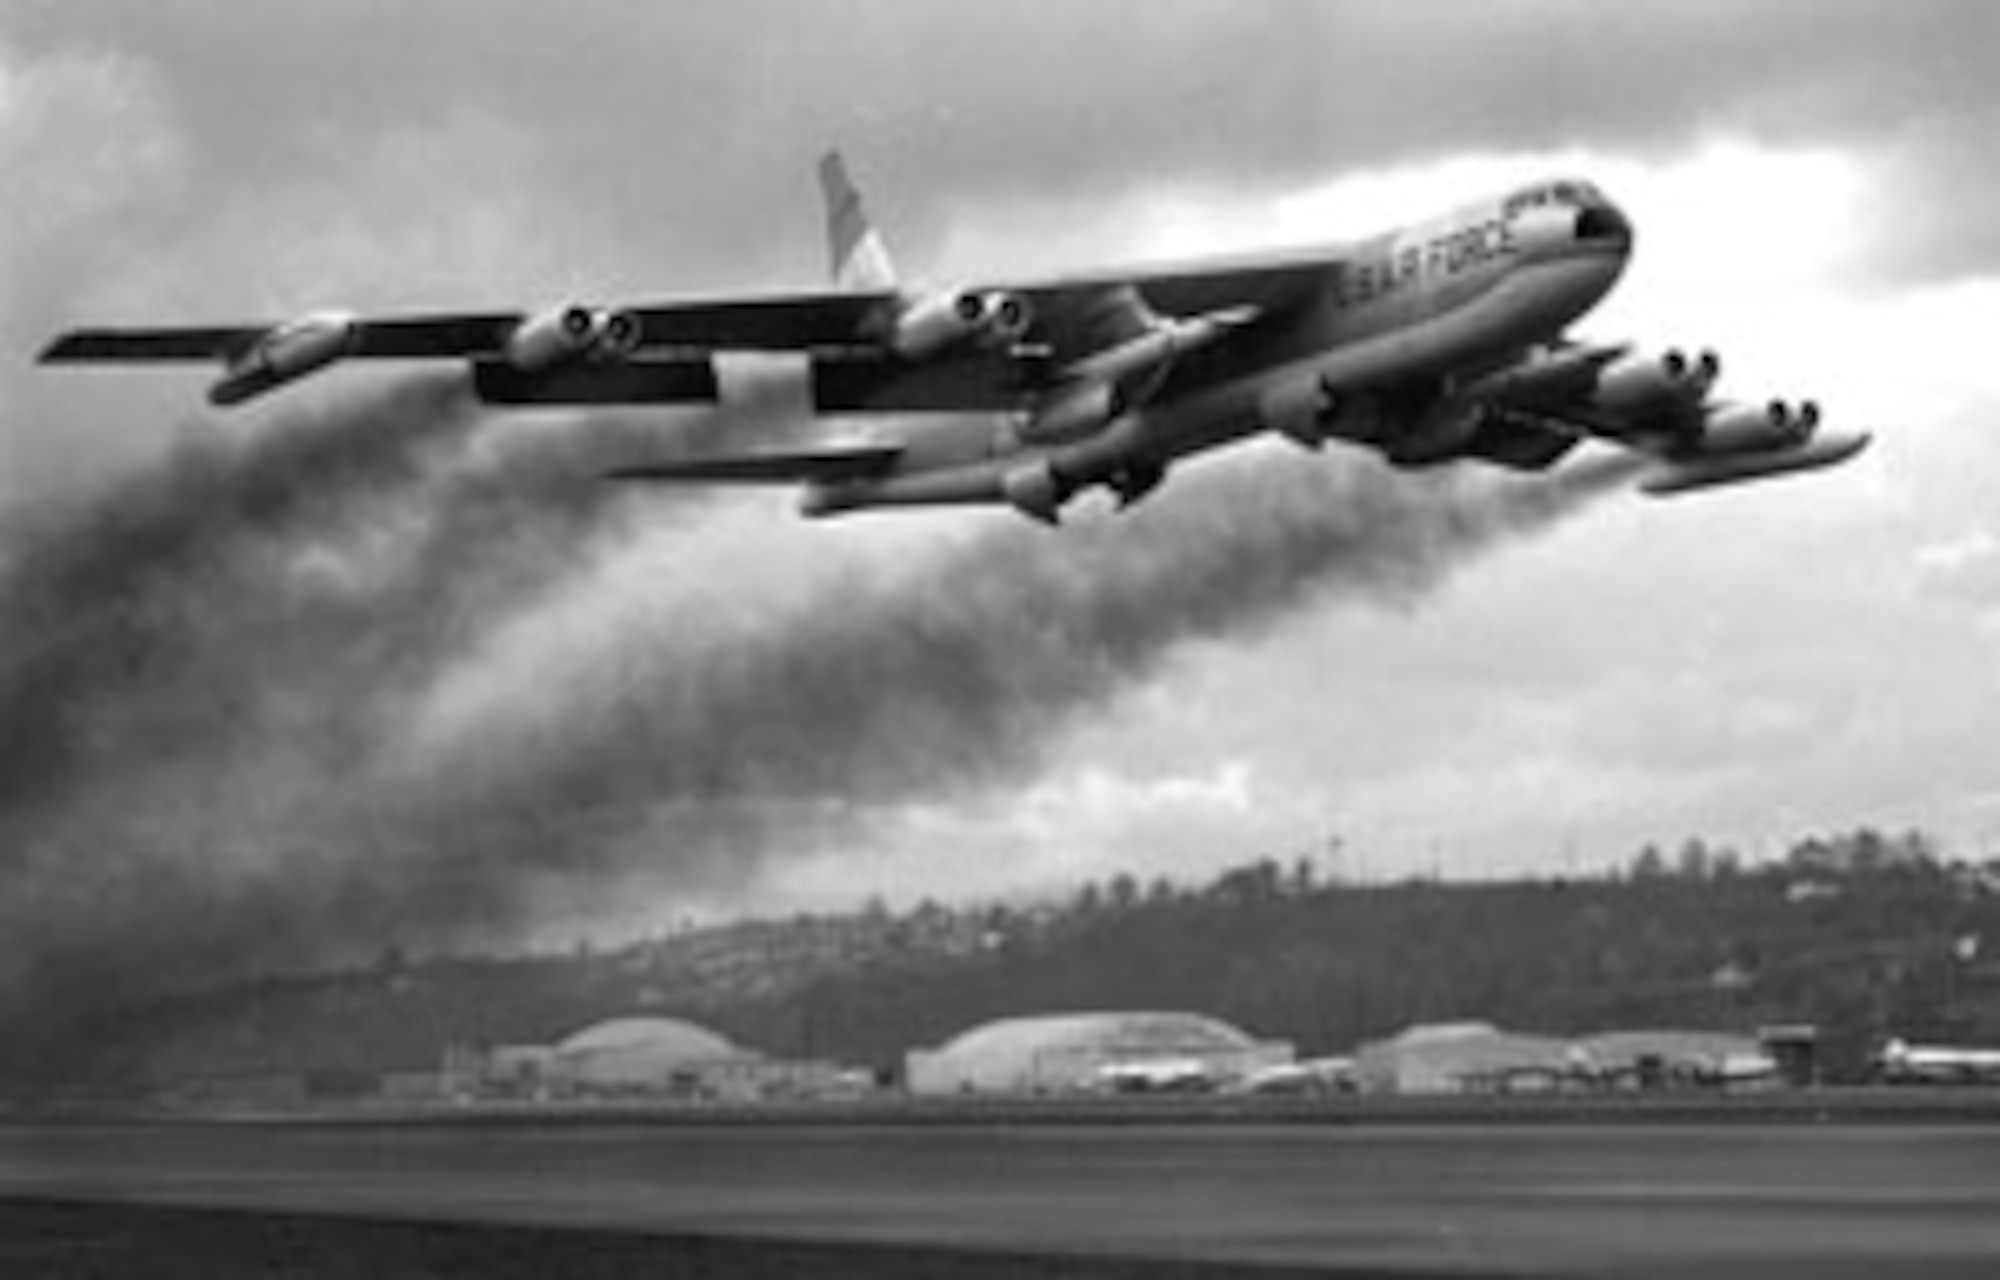 Operation CHROME DOME was a Cold War effort by the U.S. to keep B-52 Stratofortress strategic bomber aircraft armed with nuclear weapons and to remain on constant airborne alert. The bombers flew routes near the Soviet Union border and were refueled by KC-135 Stratotankers.